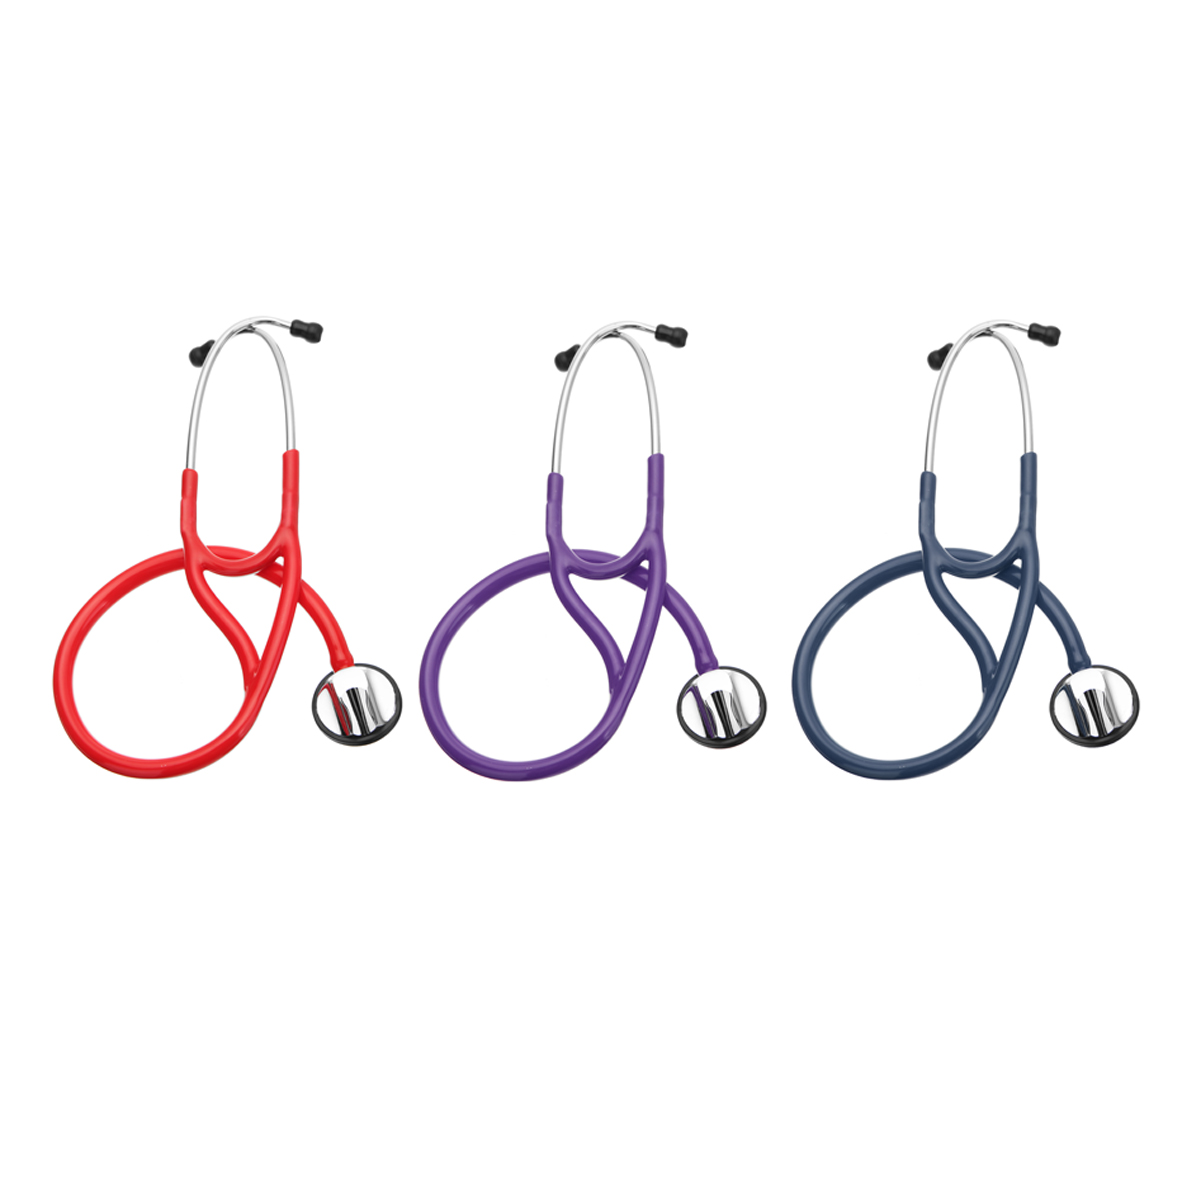 Professional-Cardiology-Stethoscope-for-Doctor-Lab-Hospital-Supplies-1316897-1